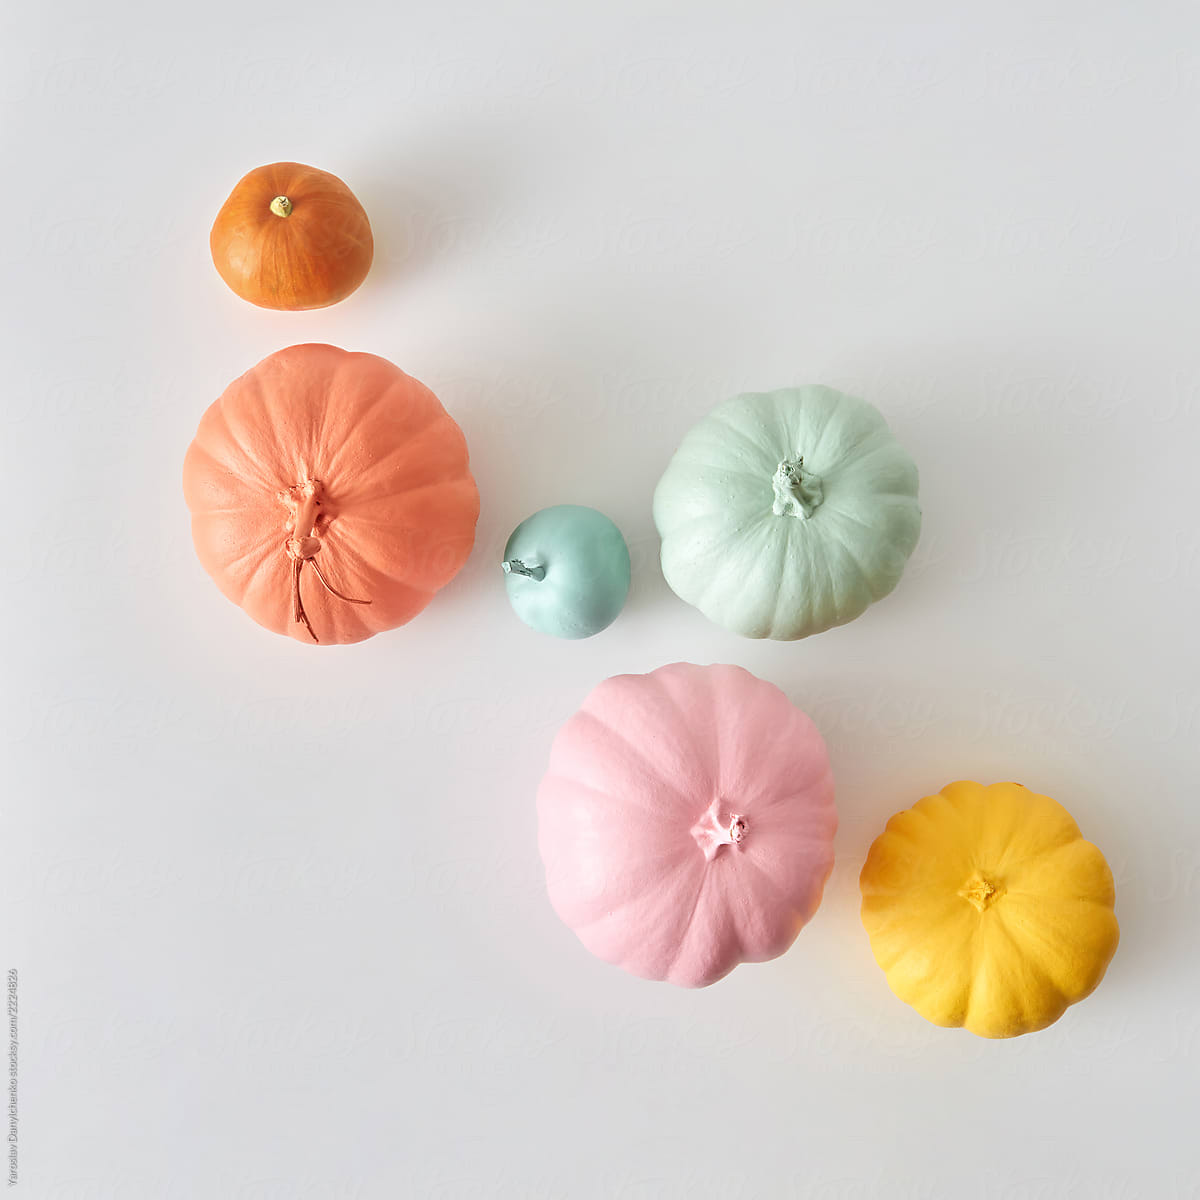 Colorful pattern from various craft painted pumpkin in a pastel